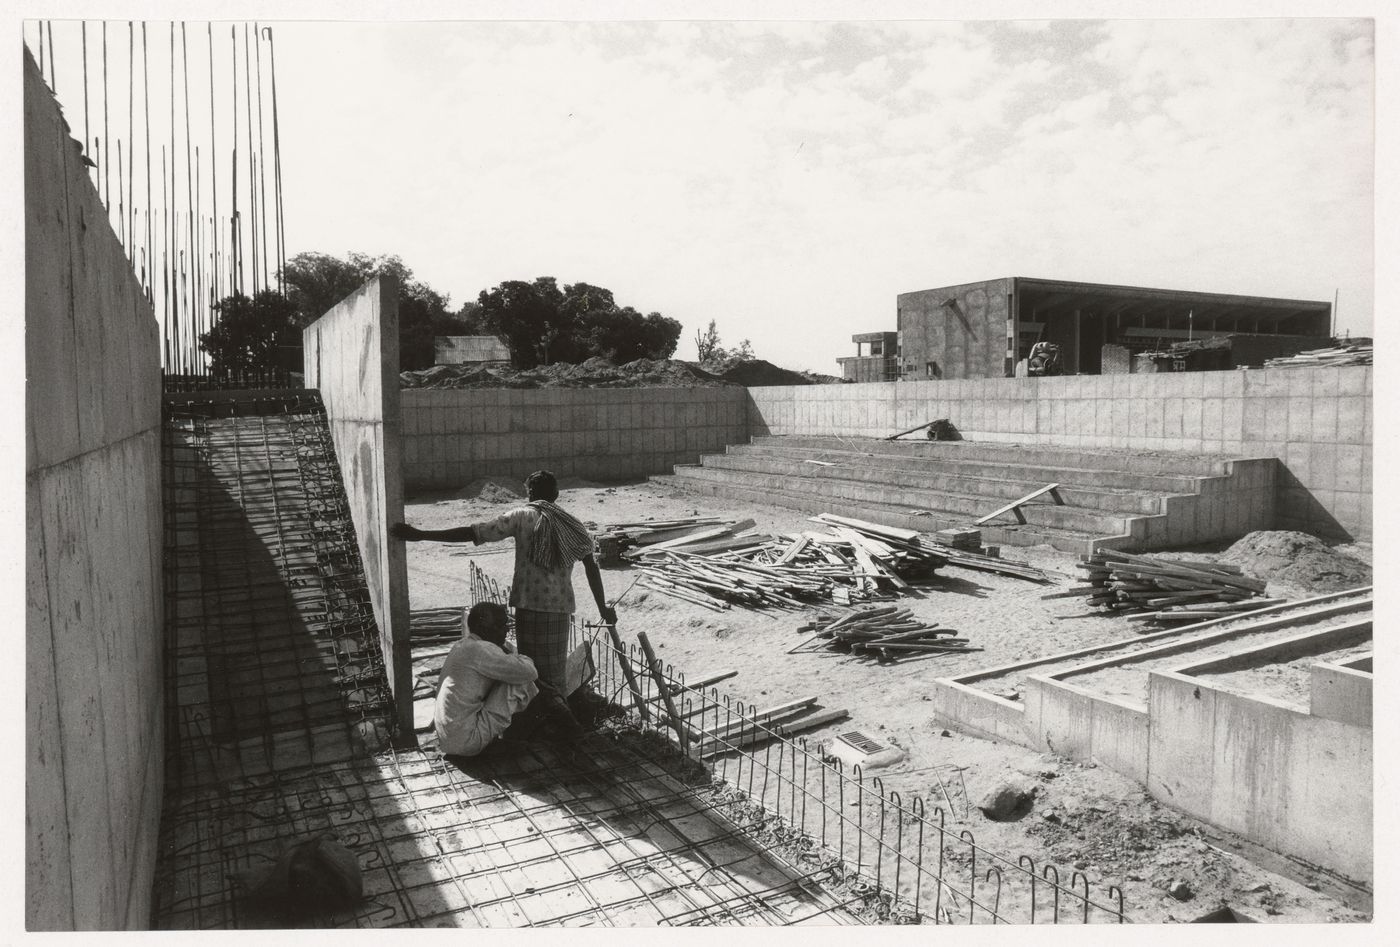 View of the Trench of Consideration under construction, Capitol Complex, Sector 1, Chandigarh, India